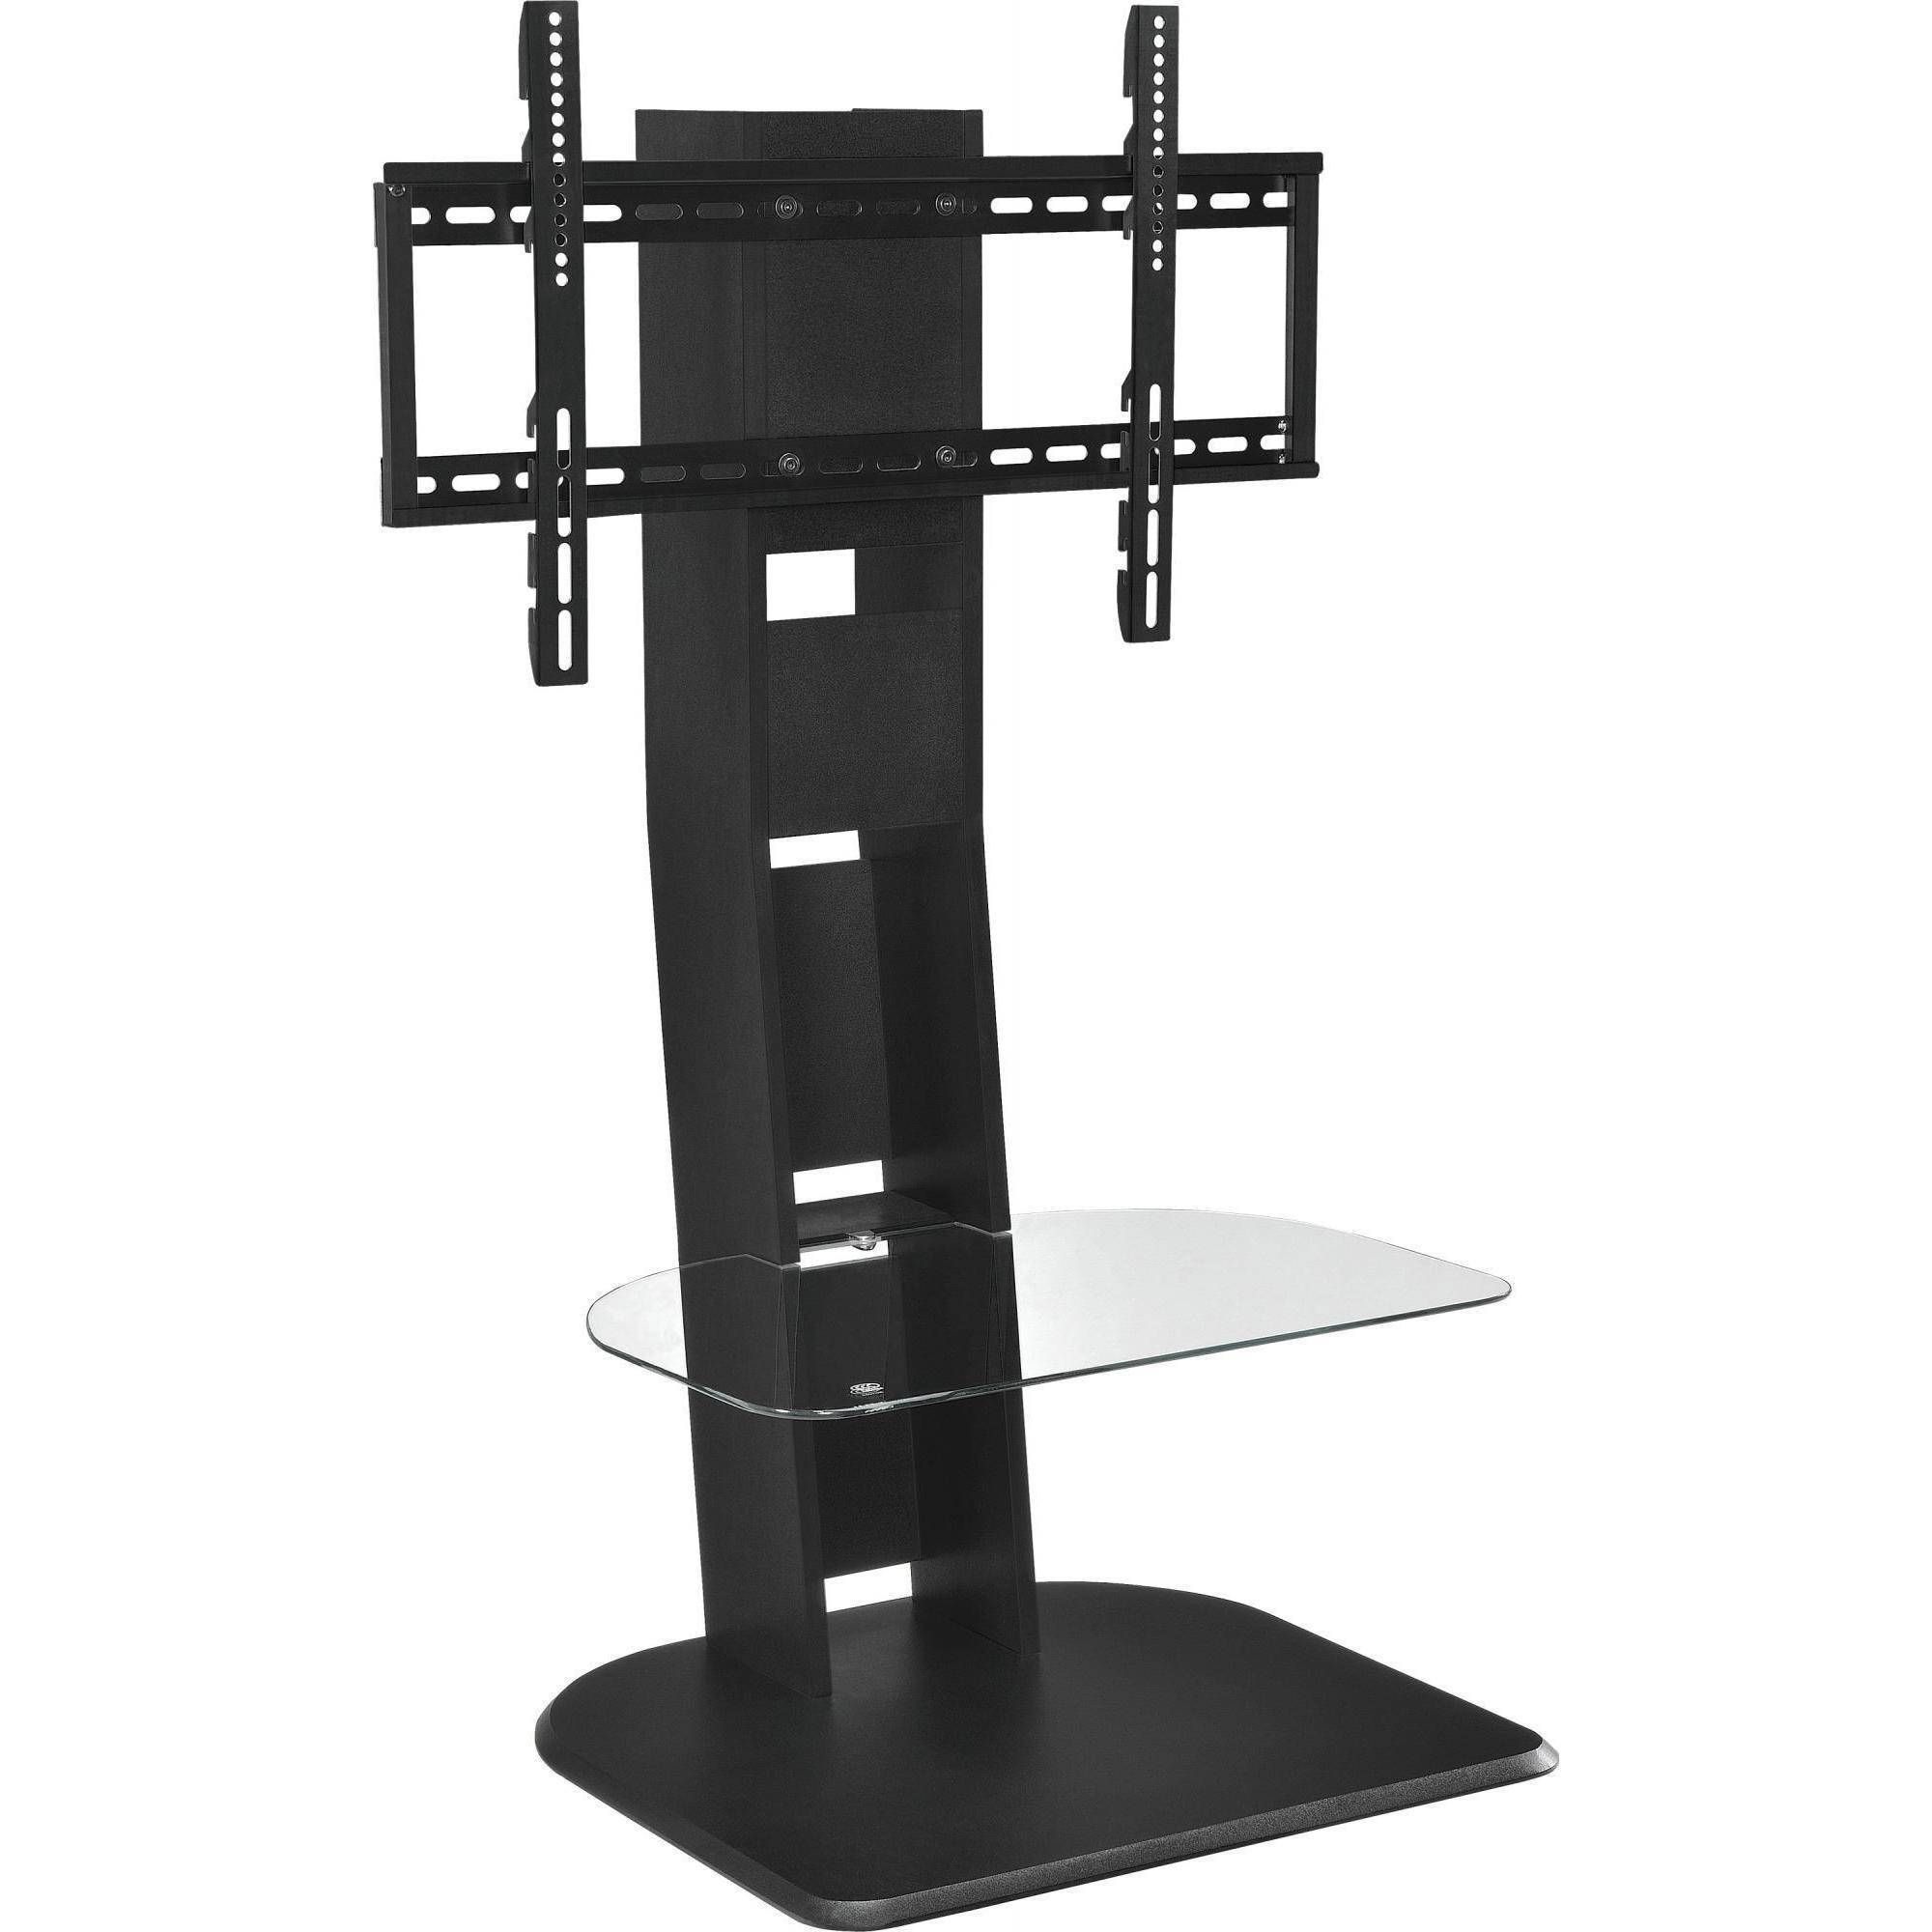 New Top Quality Tv Stand With Mount For Tvs Up To 50 With Glass Shelf With Tv Stands (View 13 of 15)